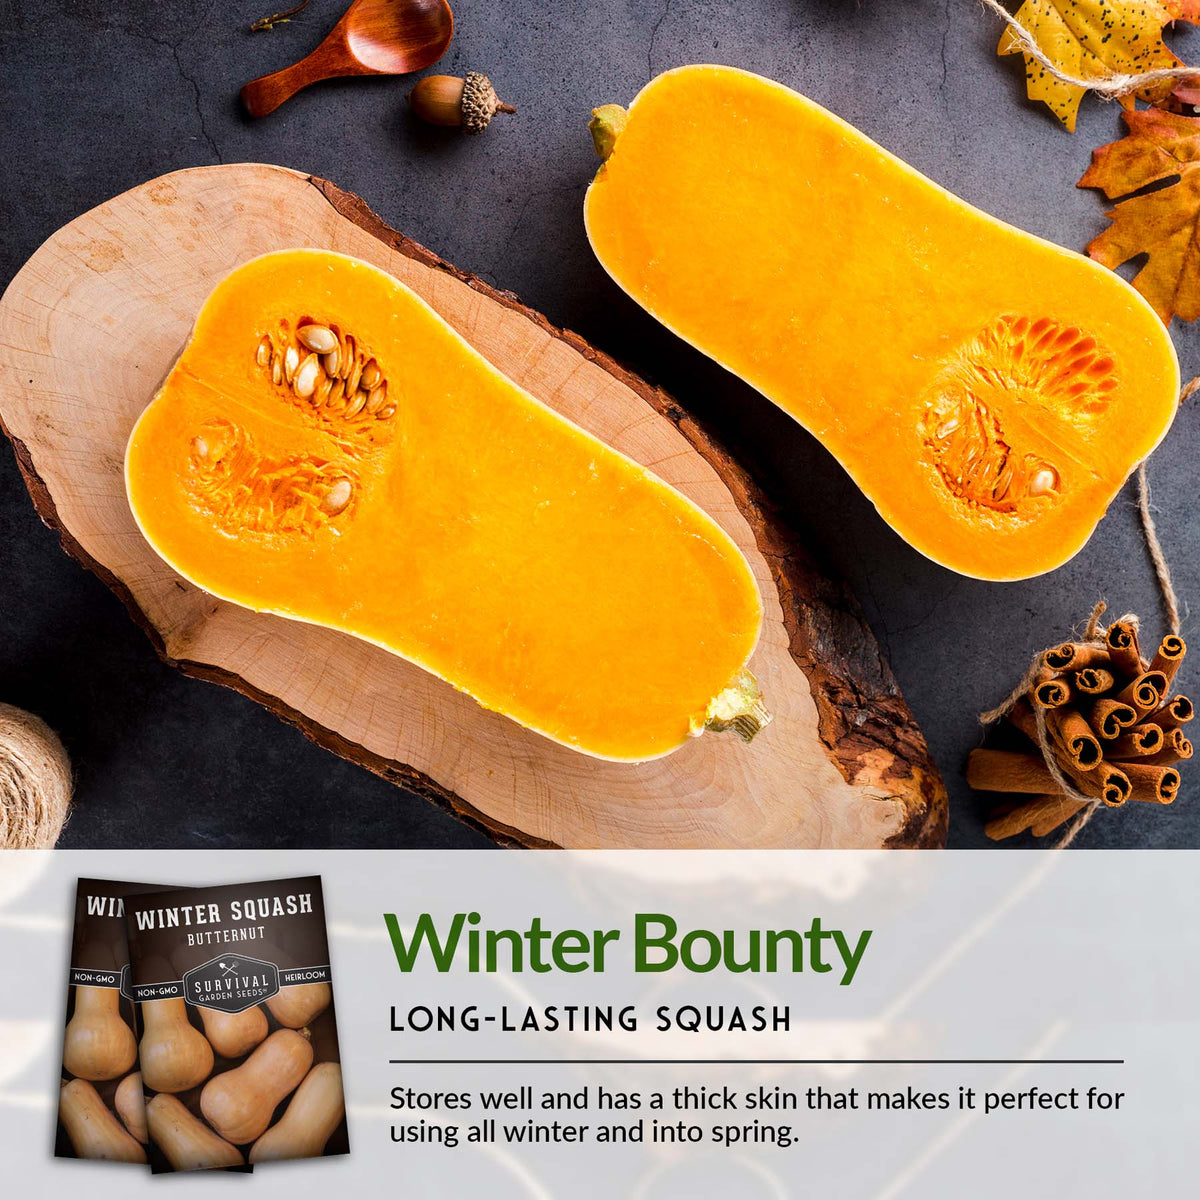 Butternut squash stores well all winter